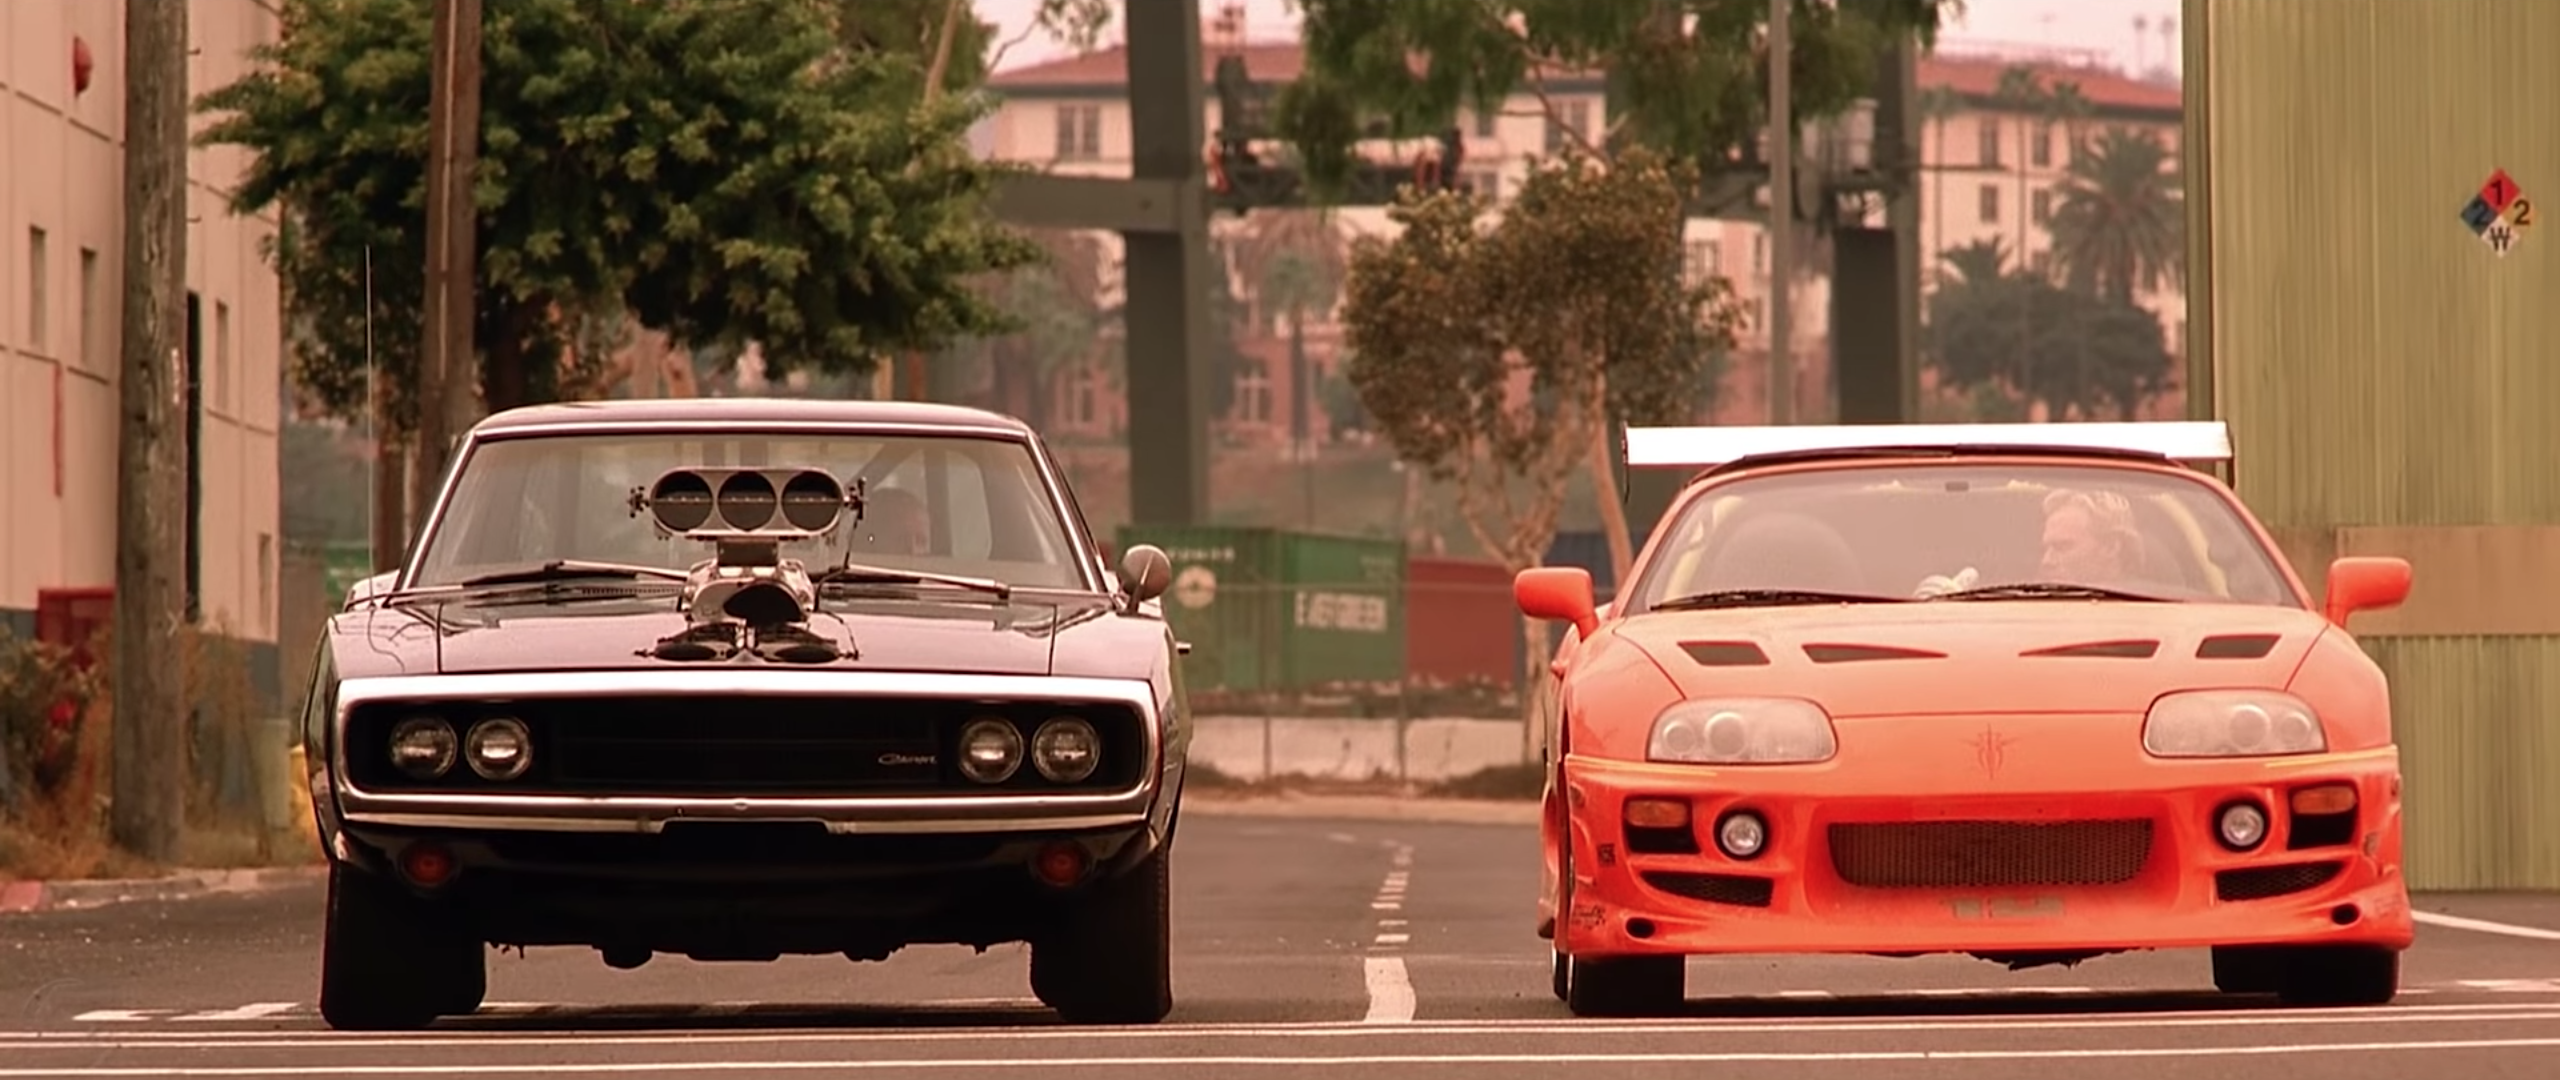 Theres Only One Way to Enjoy a Fast and Furious Movie Marathon image